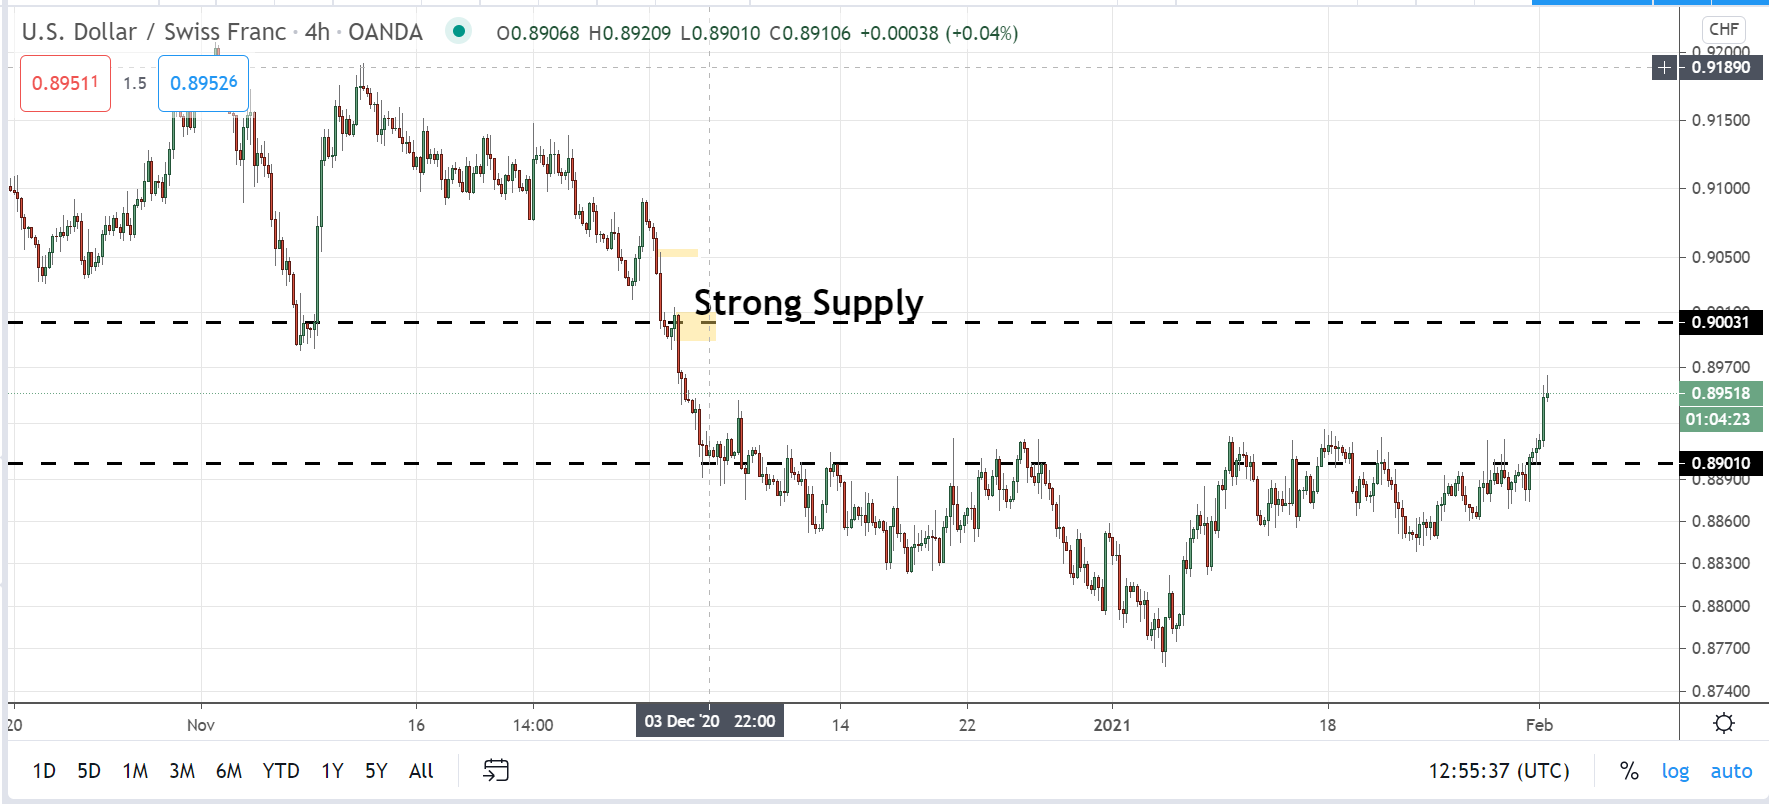 USD/CHF H4 supply and demand